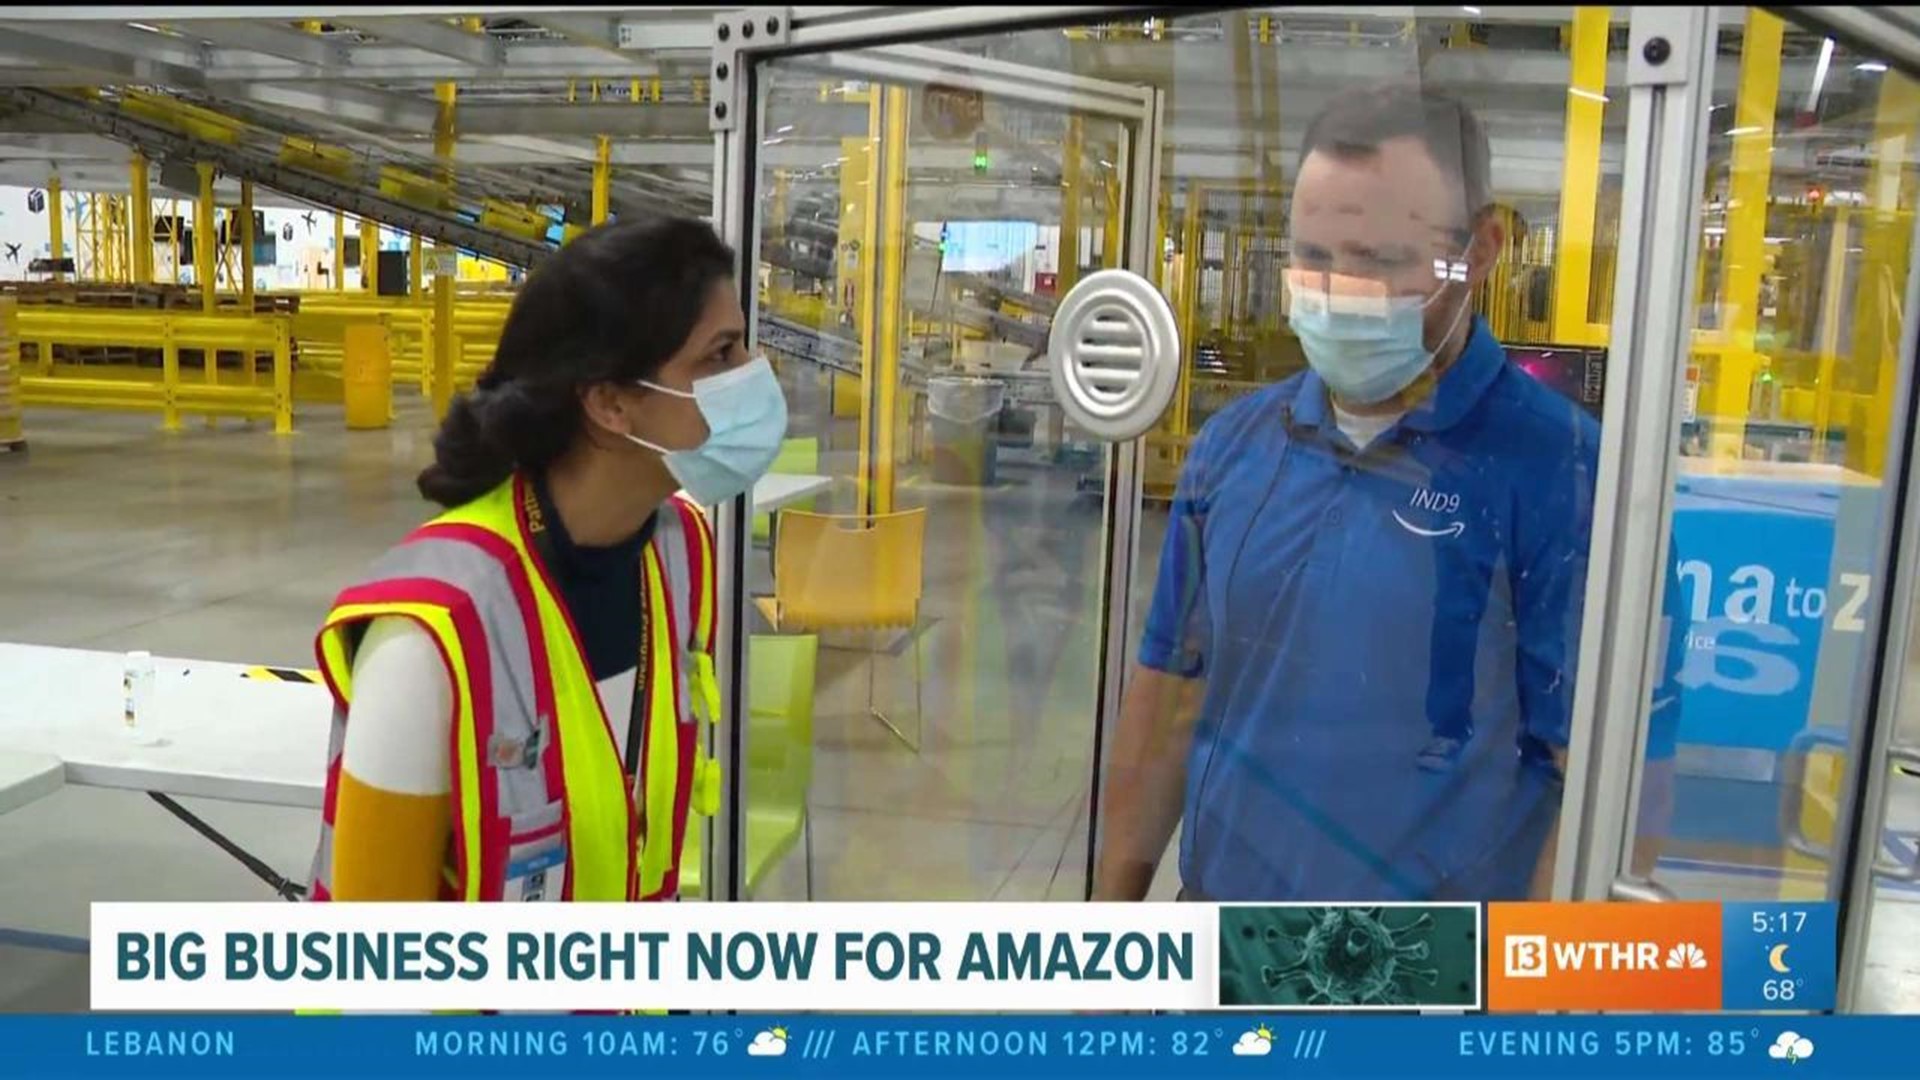 Safety measures in place at Greenwood Amazon facility